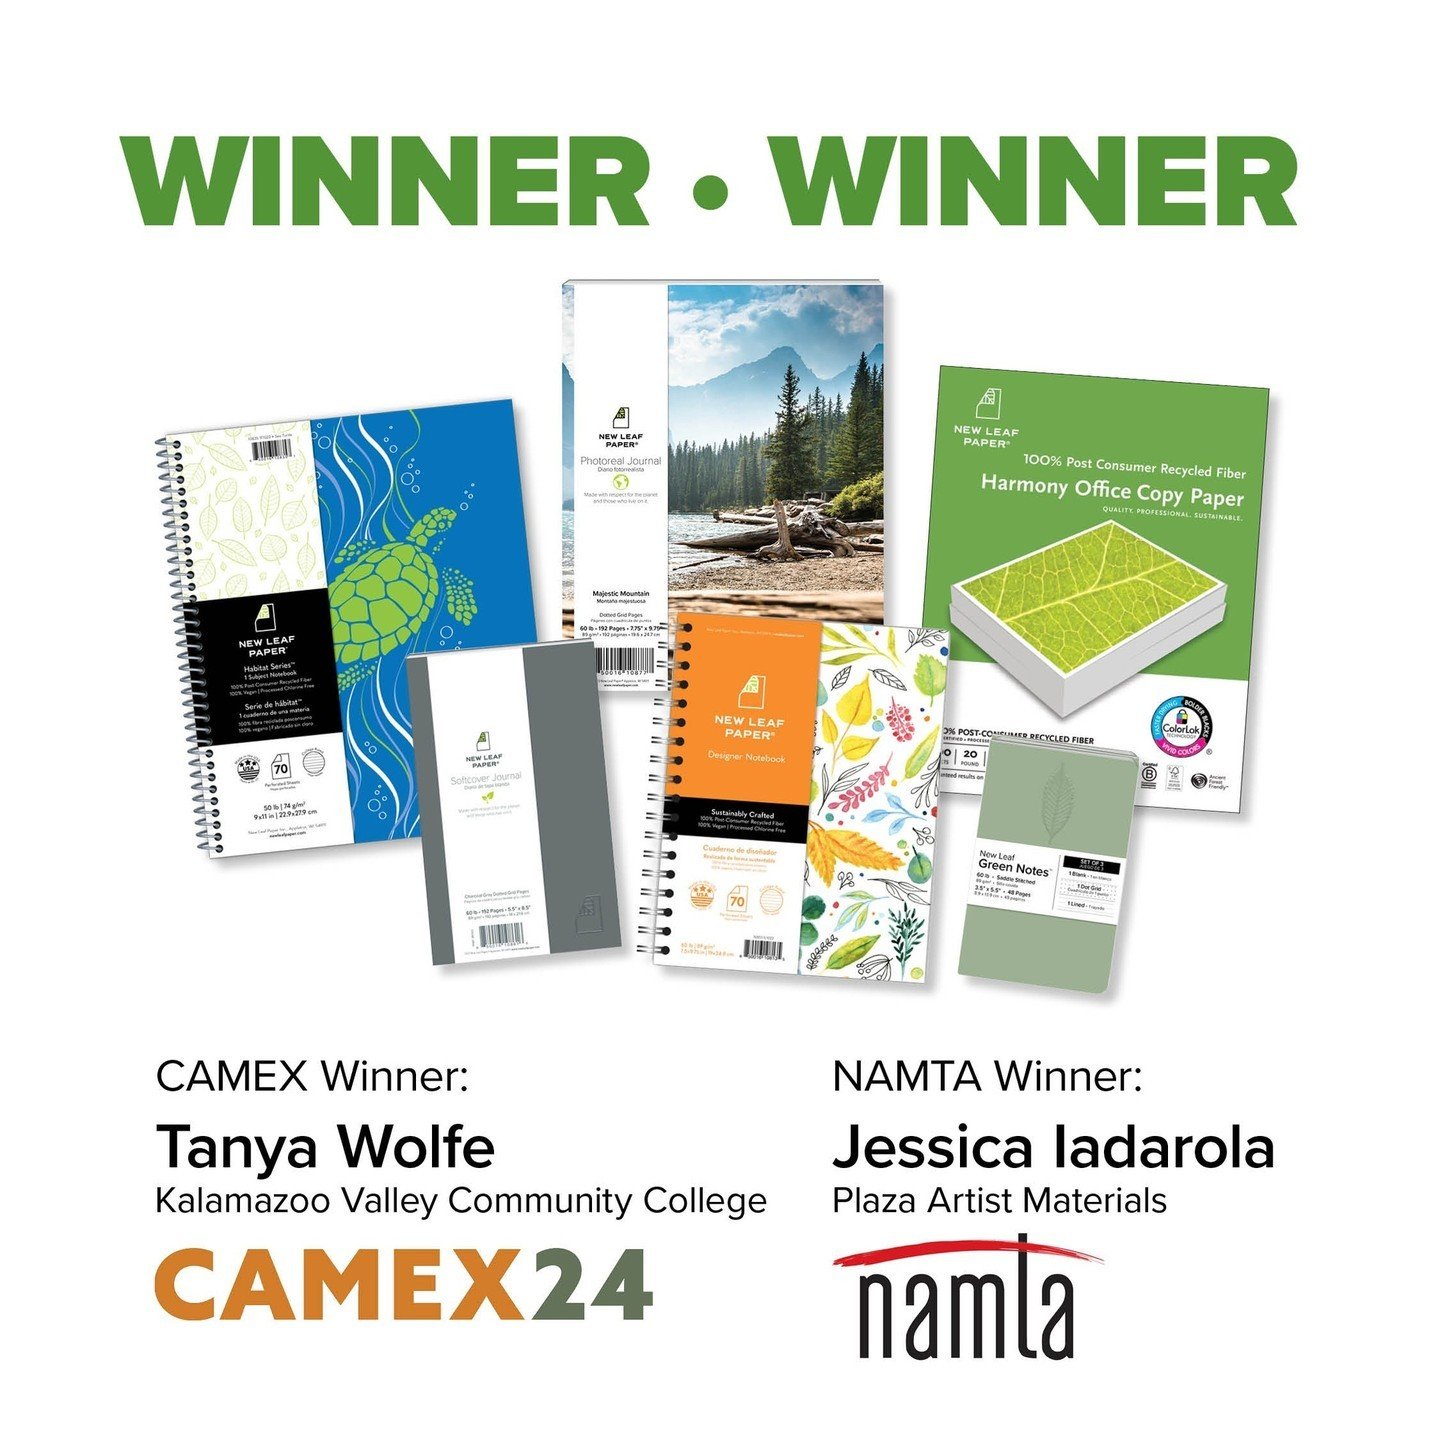 Congratulations to the winners of our Camex and NAMTA drawings! We hope you enjoy your prize package!⁠
⁠
#newleafpaper #BCorp #win #sustainable #sustainability #sustainableliving #ecofriendly #ecoconscious #gogreen #ecofriendlyproducts #planneraddict